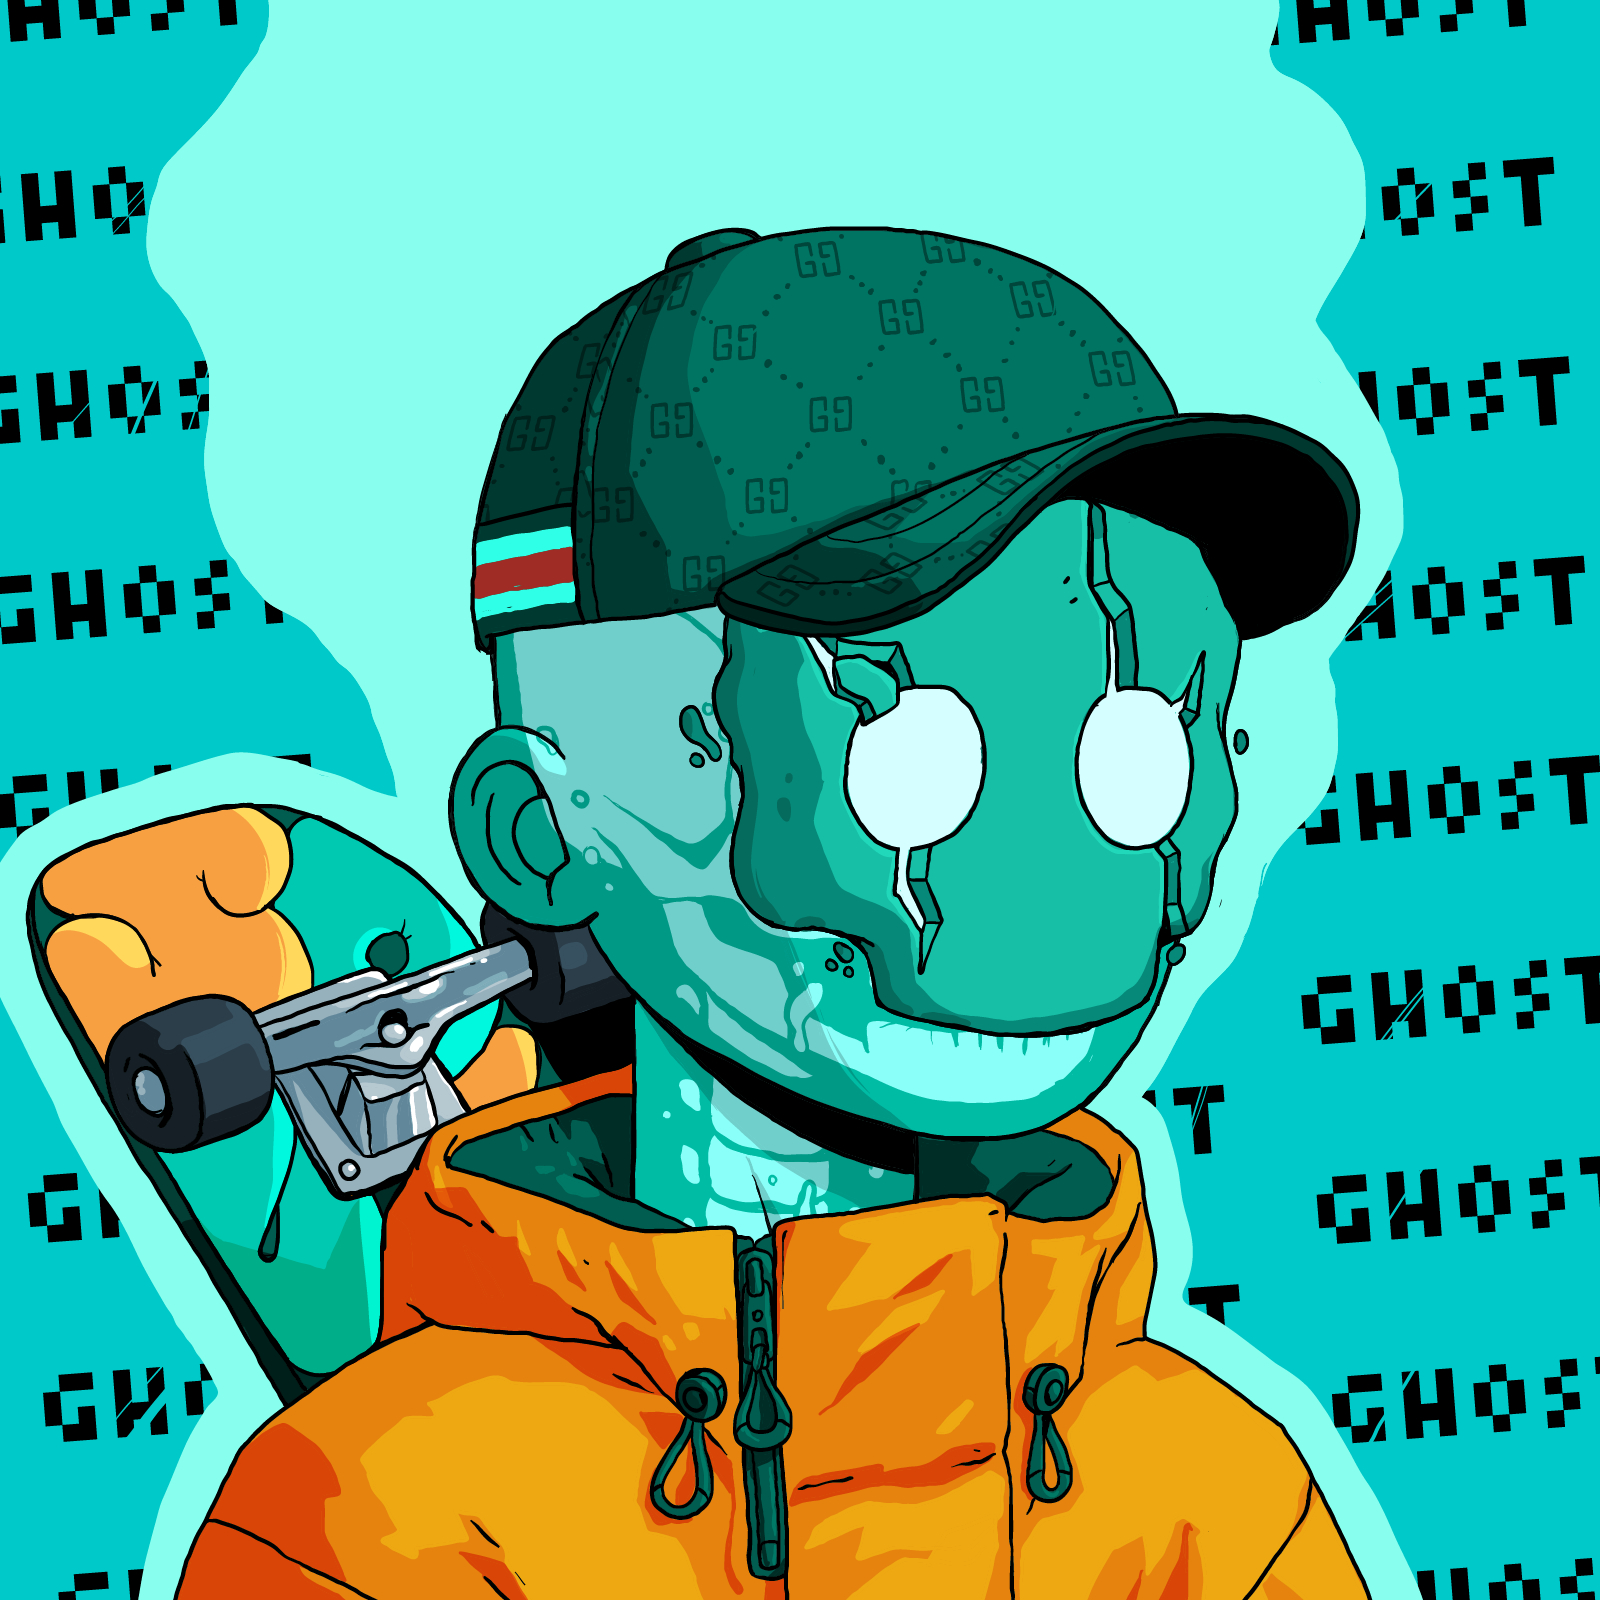 GhostKid #2420